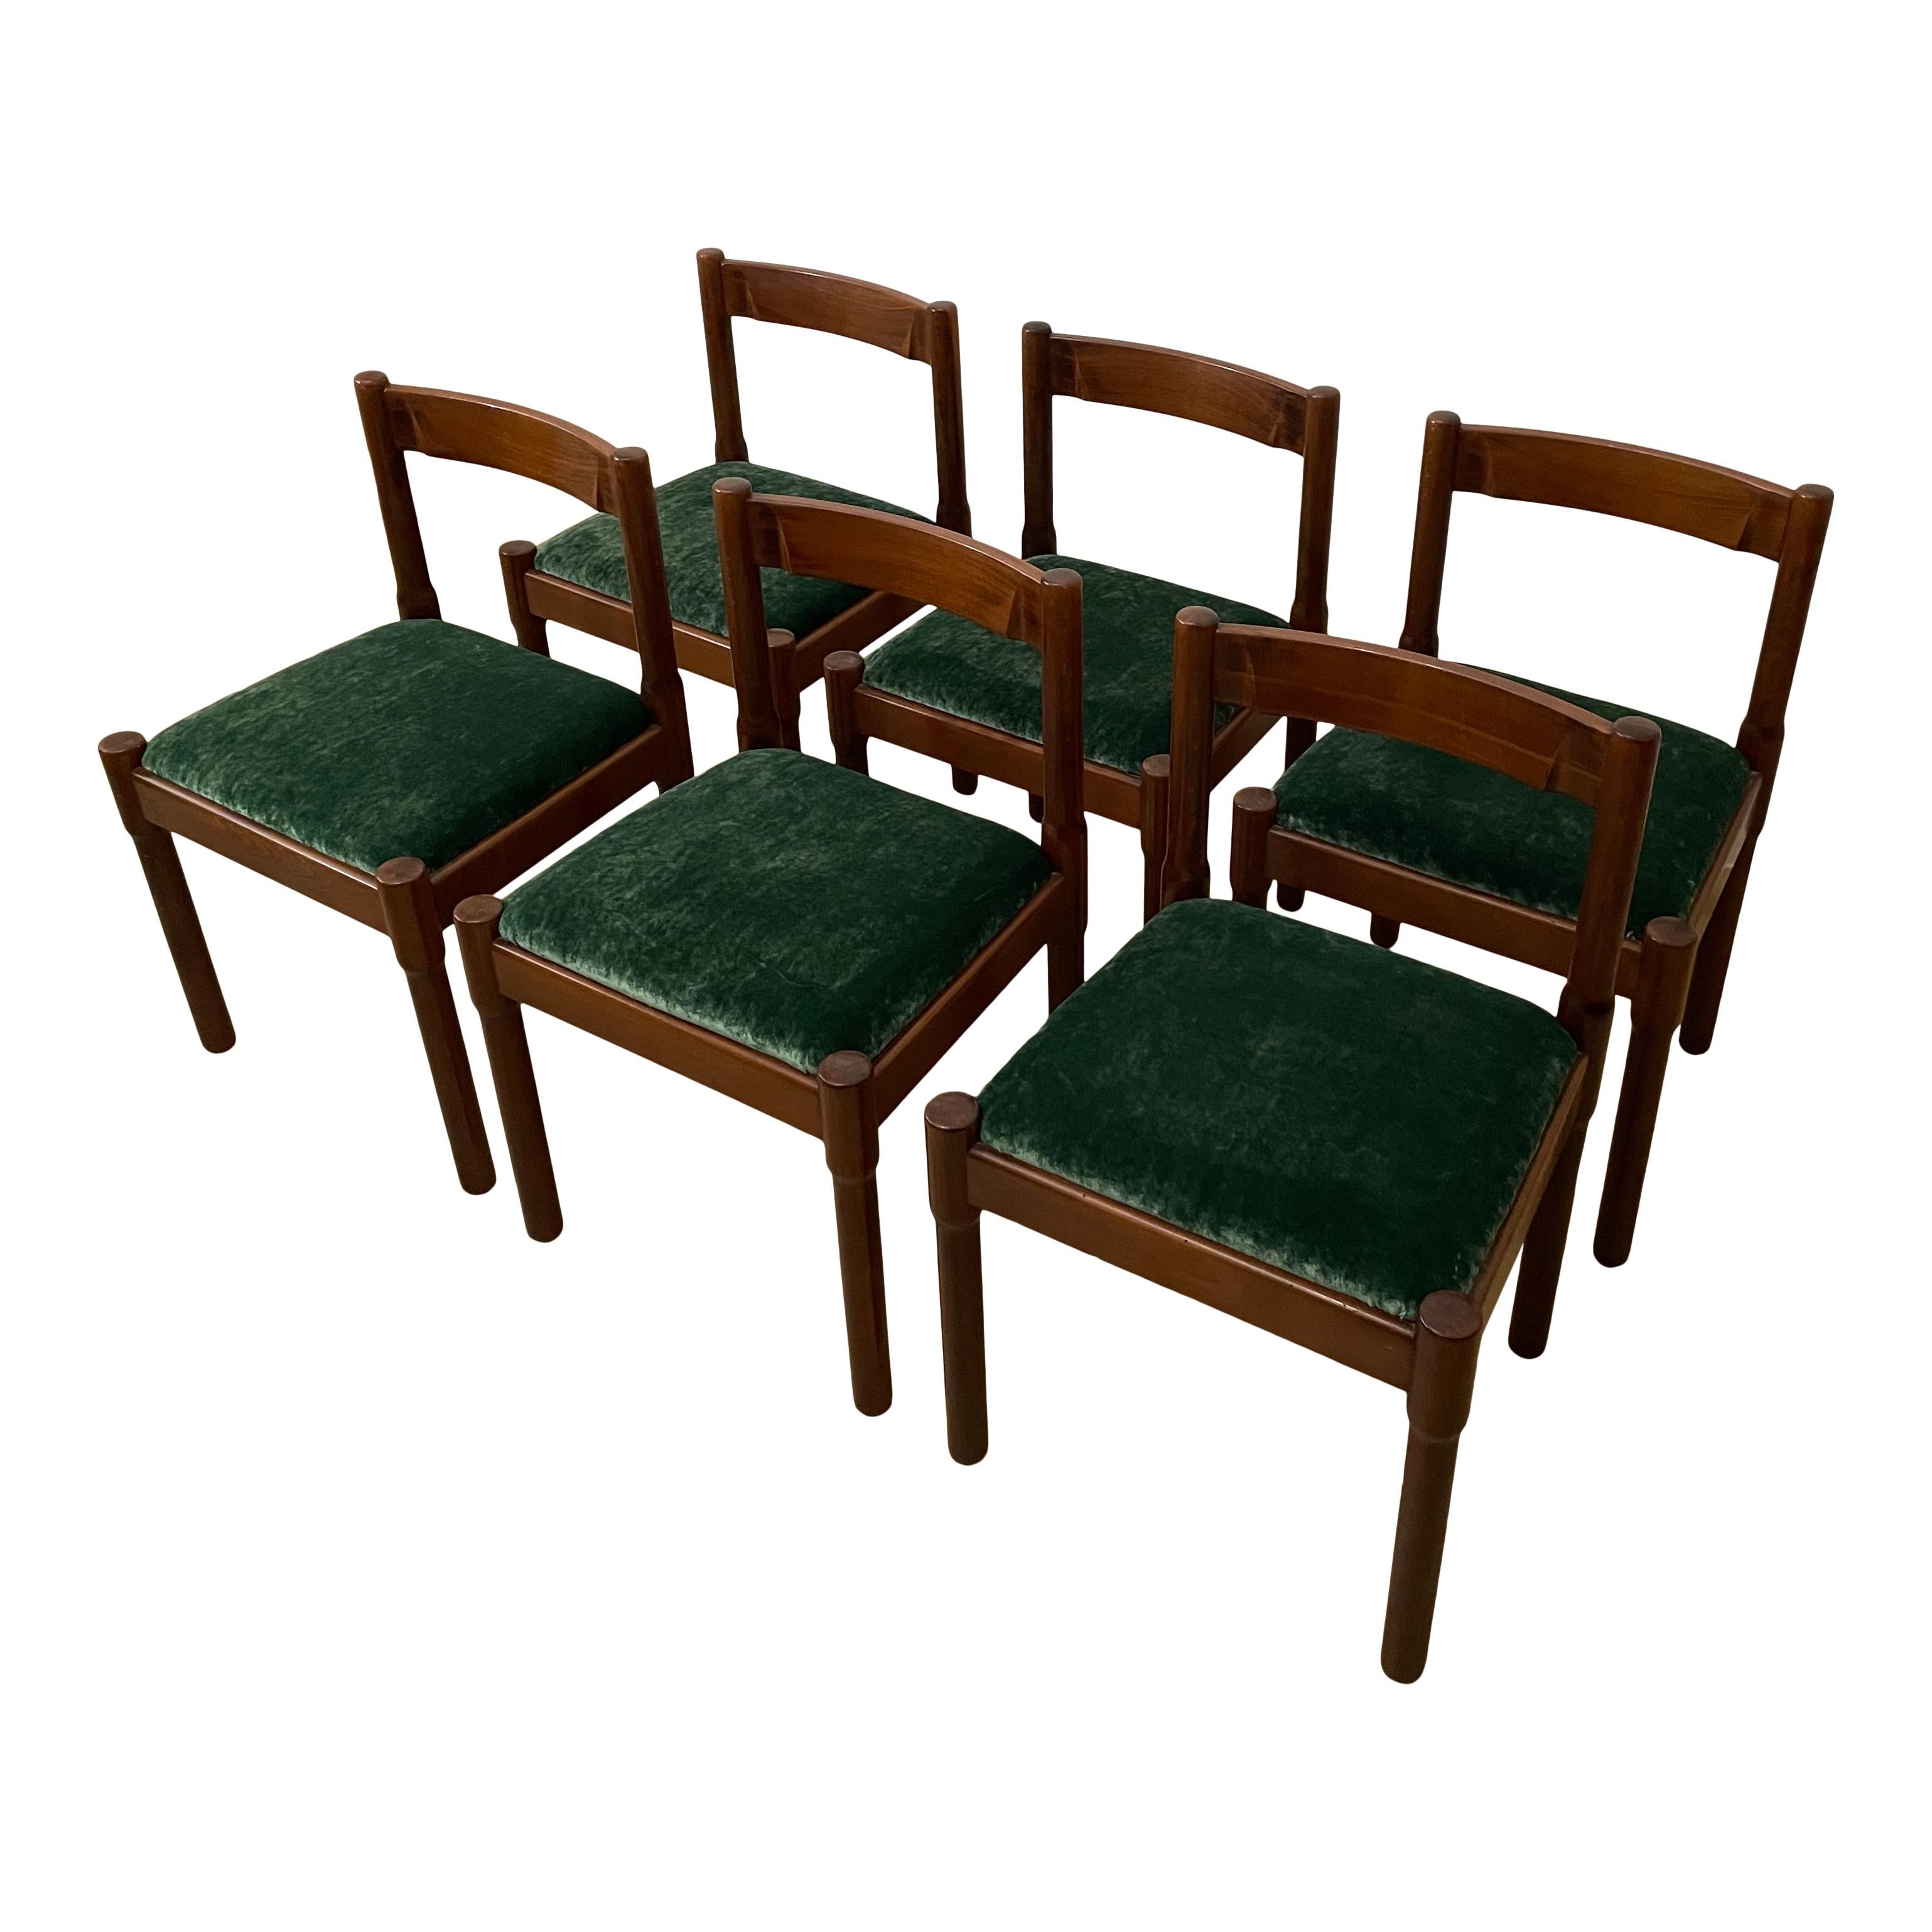 Mid-Century Modern Vico Magistretti Midcentury “Carimate” Dining Chair for Cassina, 1963, Set of 4 For Sale